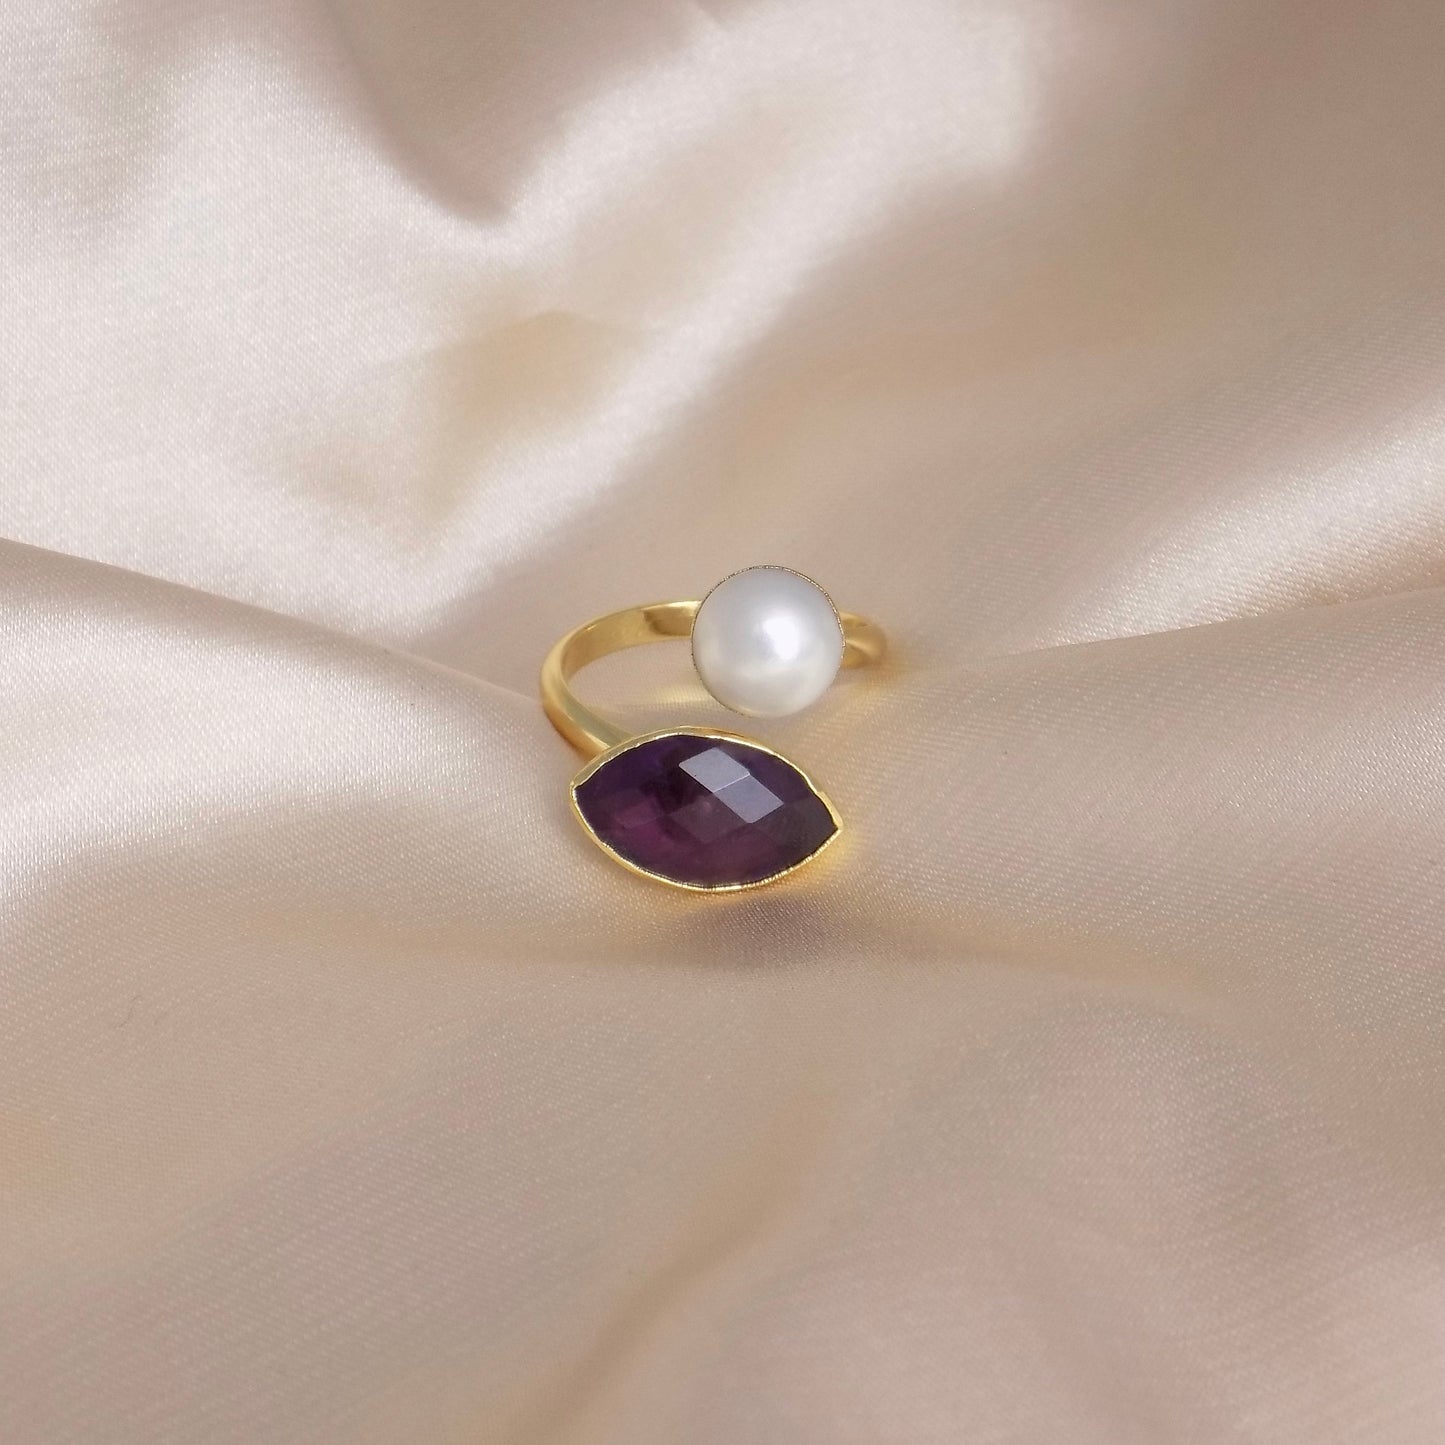 Amethyst Ring, Freshwater Pearl Ring, Gold Adjustable Multistone Statement Rings, Gift Women, M7-11